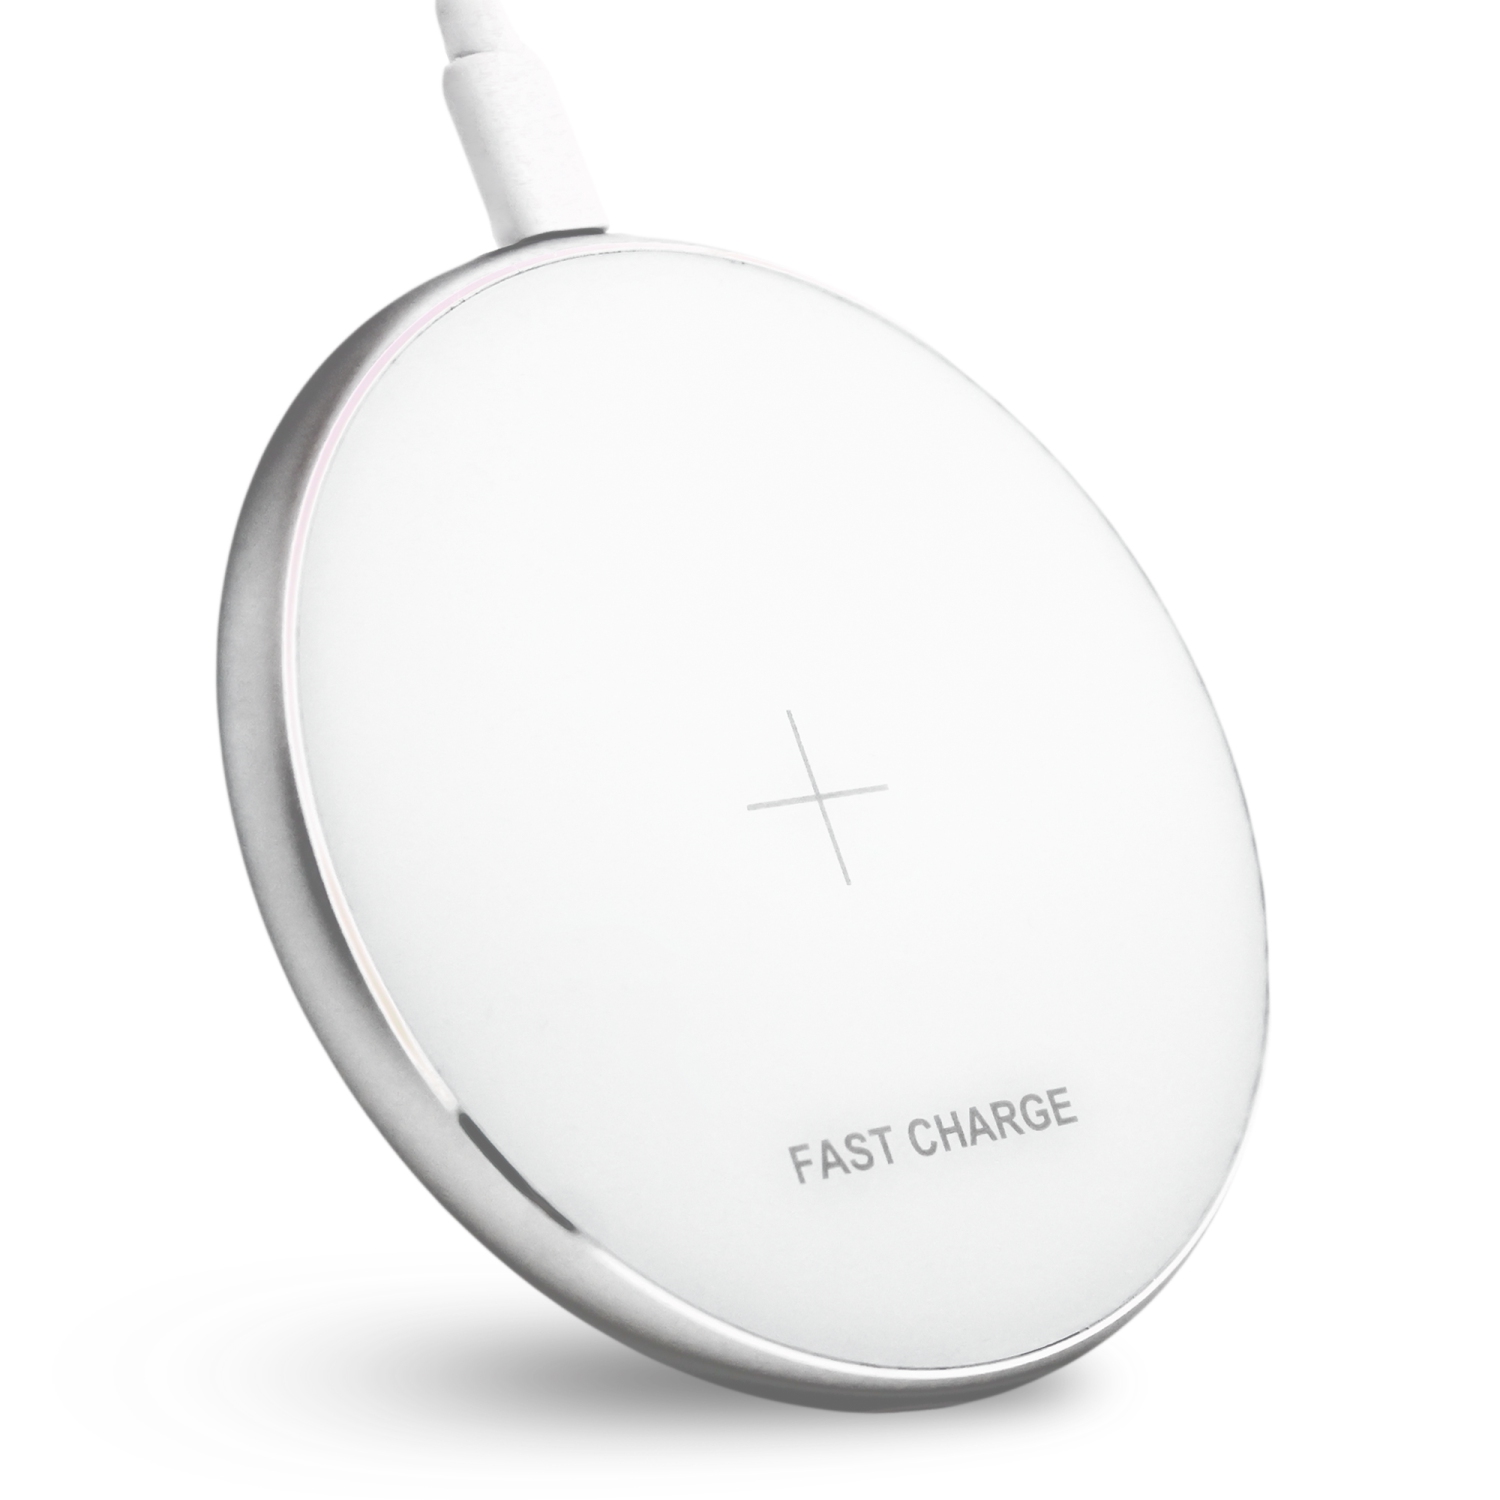 Etallic Swift Fast Wireless Charging Pad, Qi-Certified, 7.5W for APPLE iPhone, 10W for SAMSUNG (No Adapter)